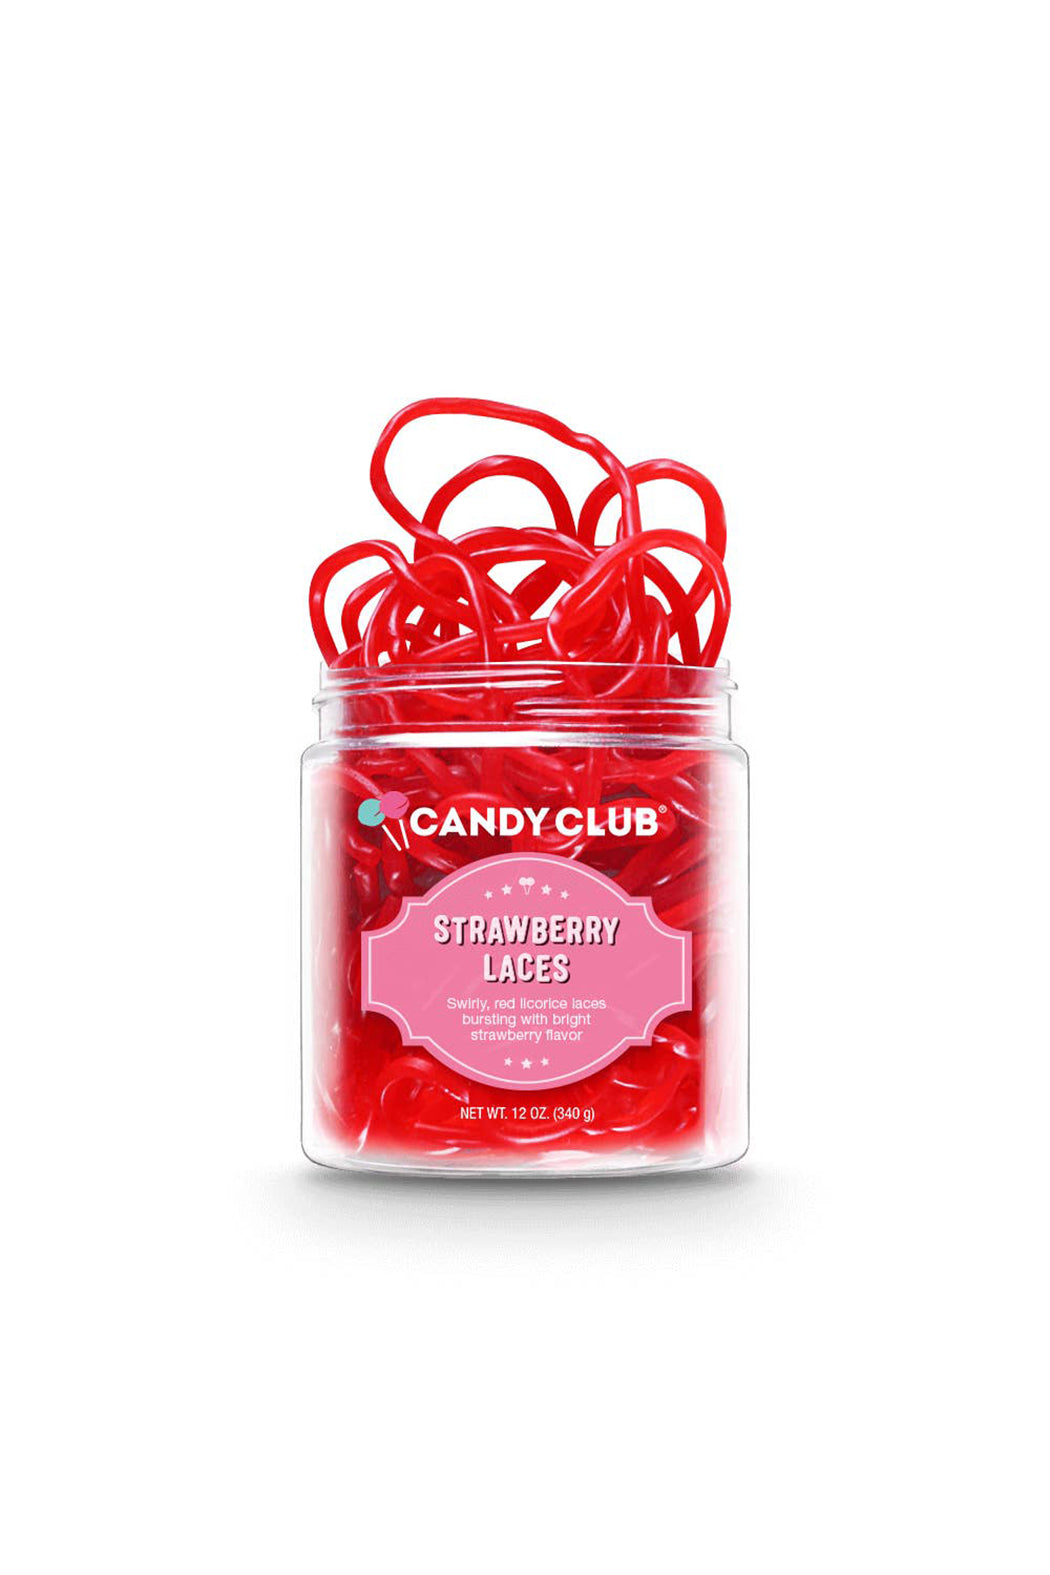 Candy Club Strawberry Laces